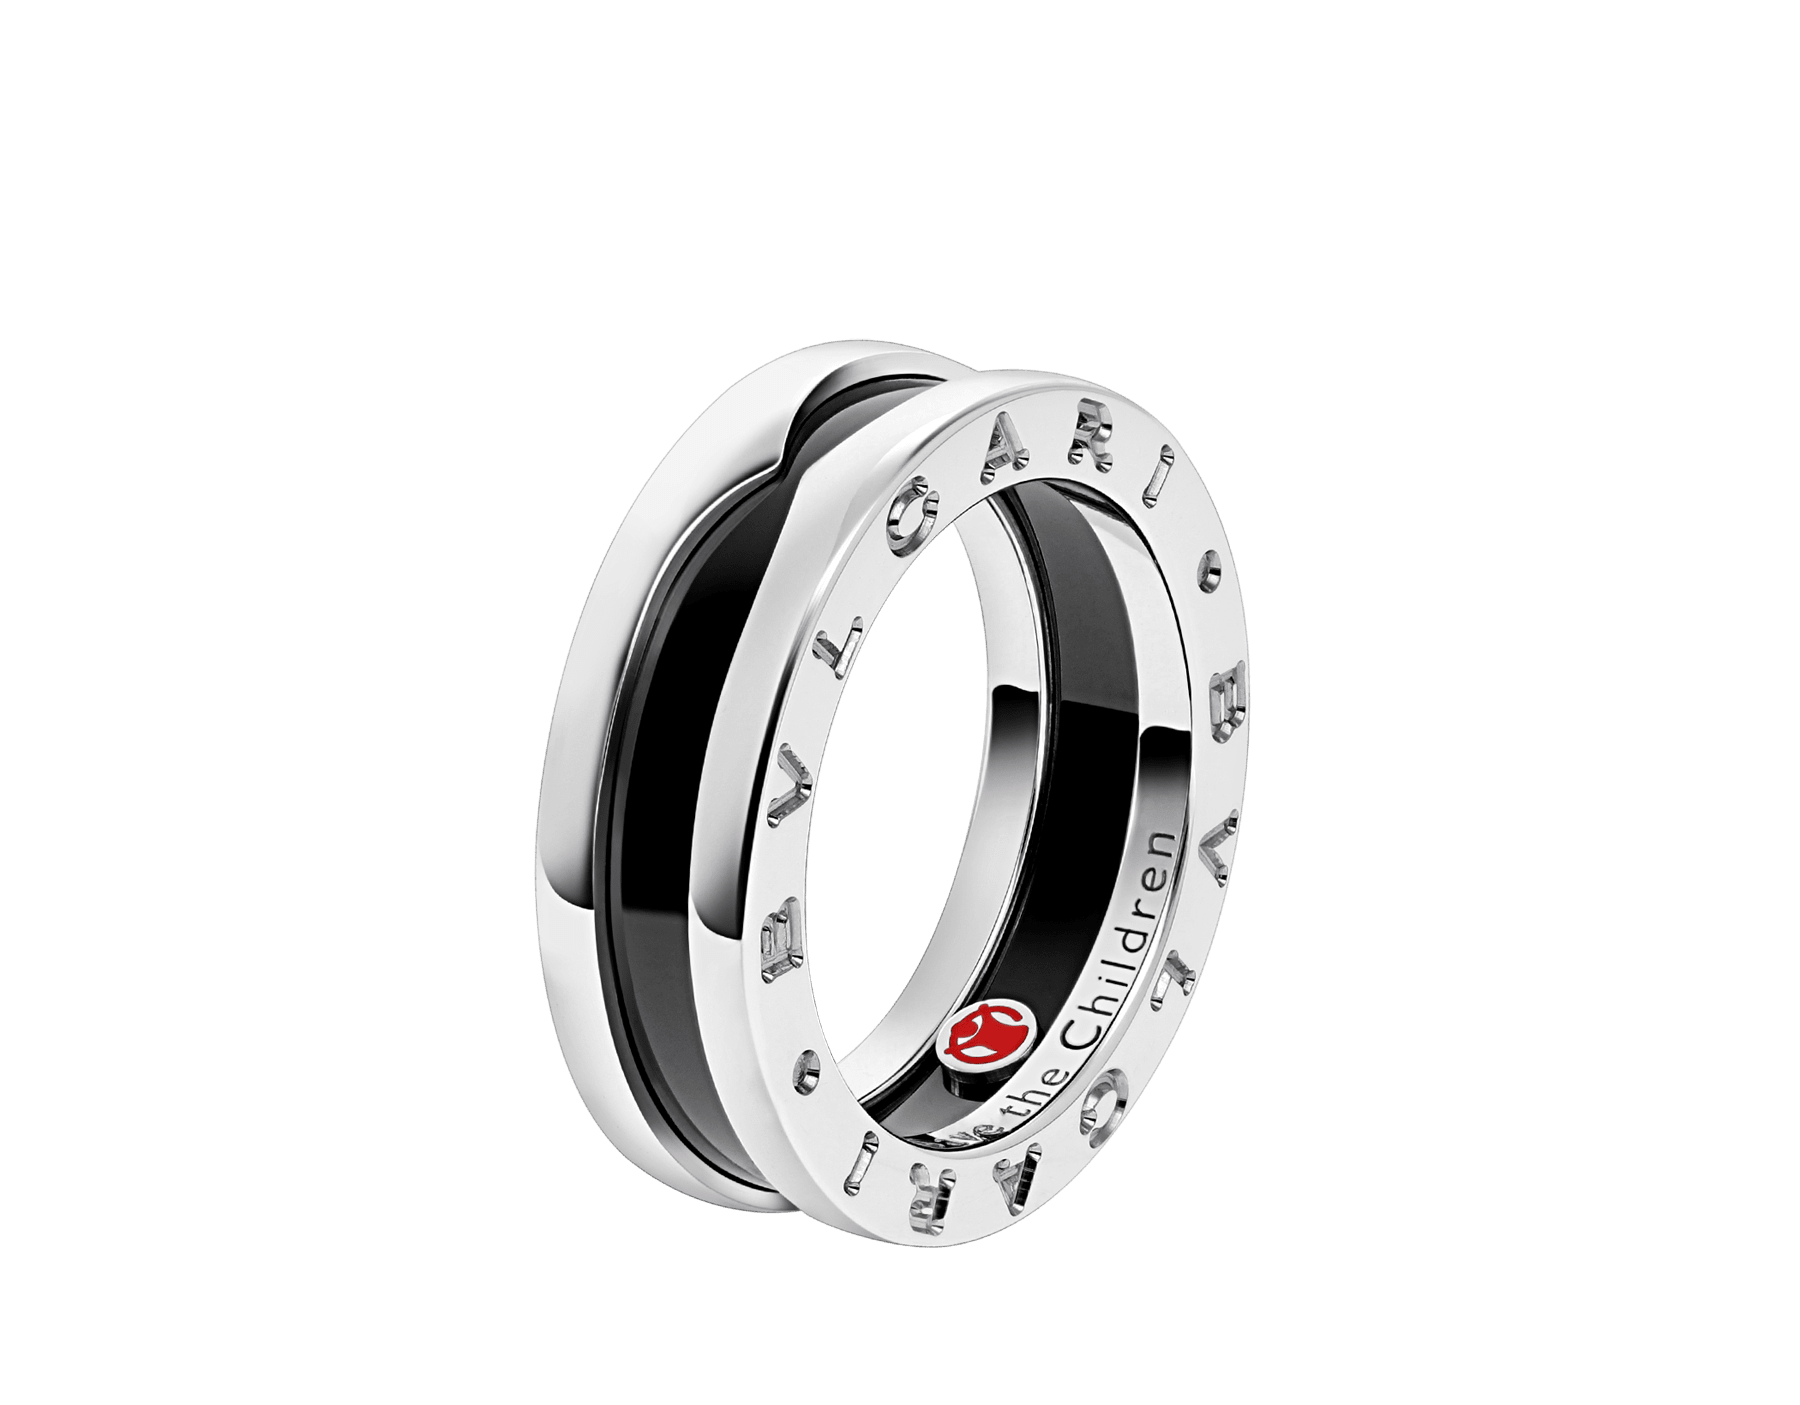 Save the Children one-band sterling silver ring with black ceramic AN855770 image 1